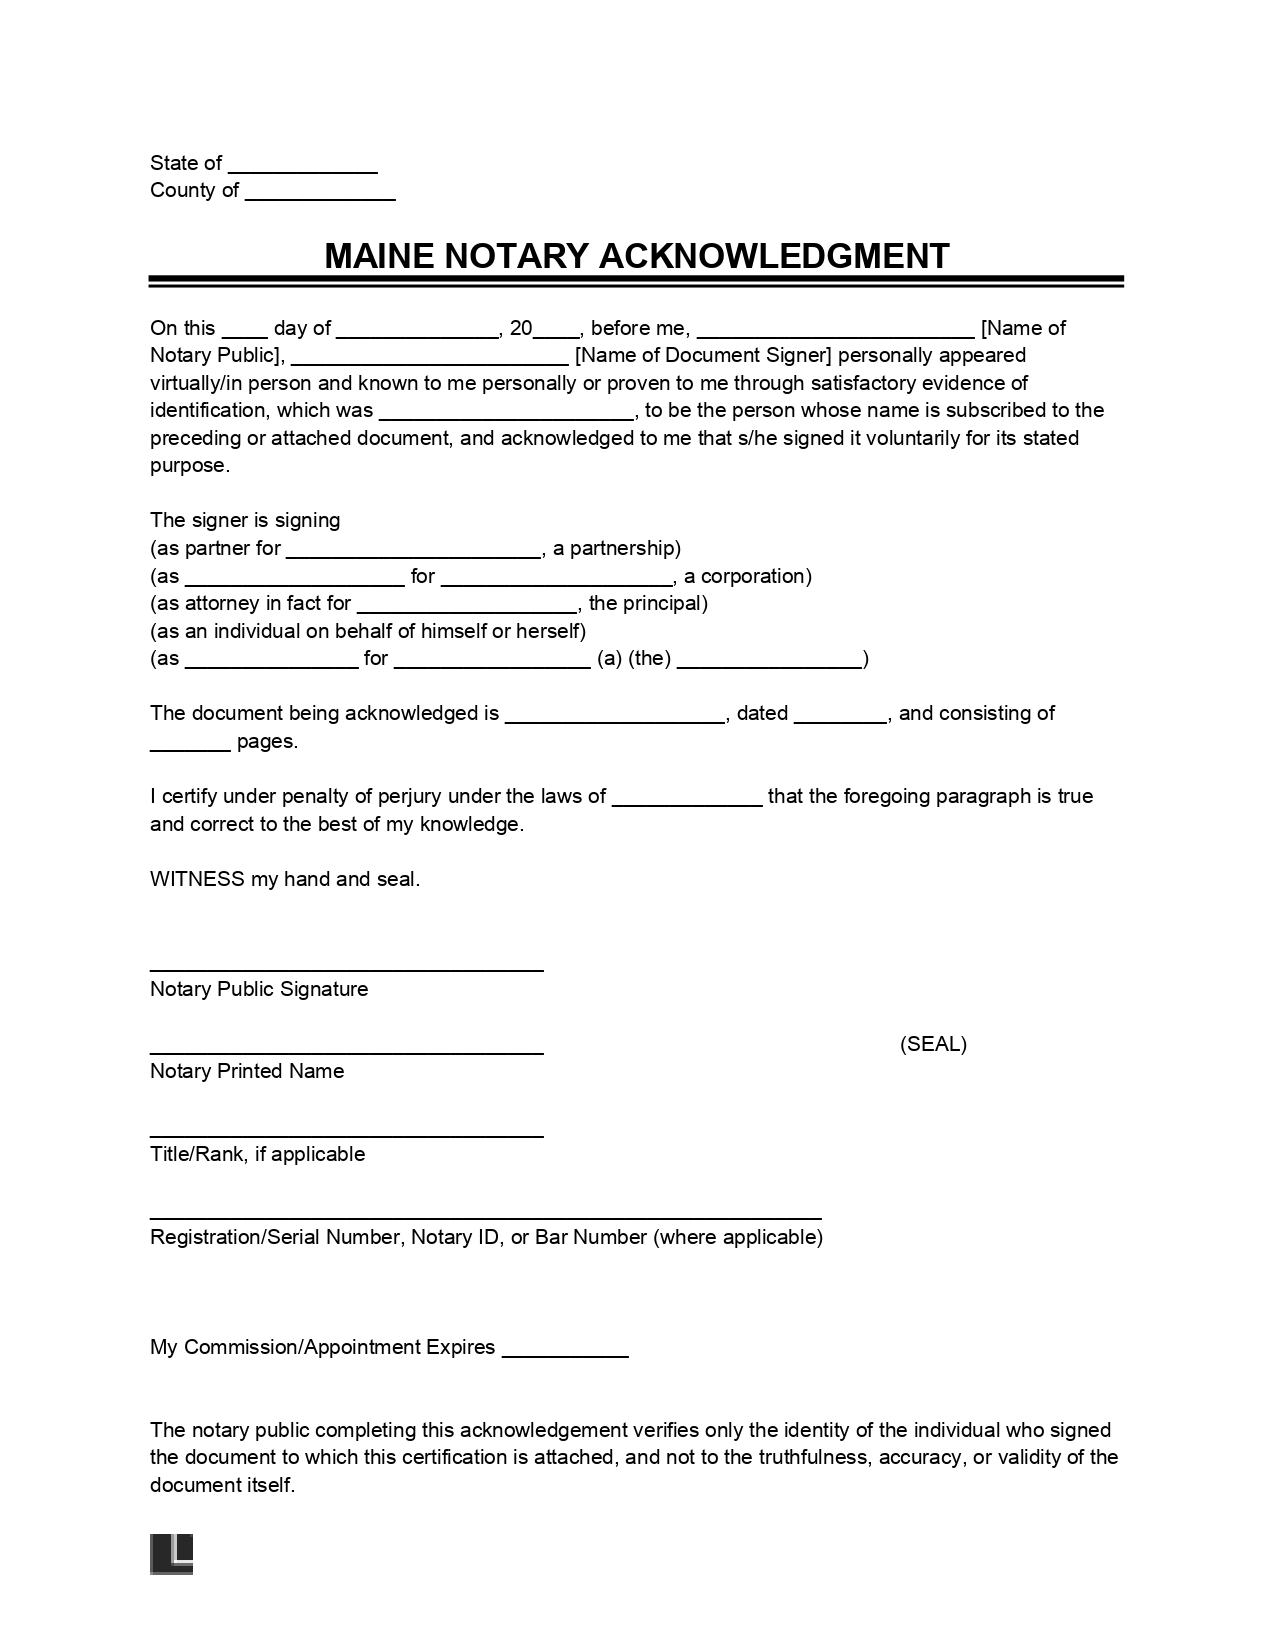 Maine Notary Acknowledgment Form